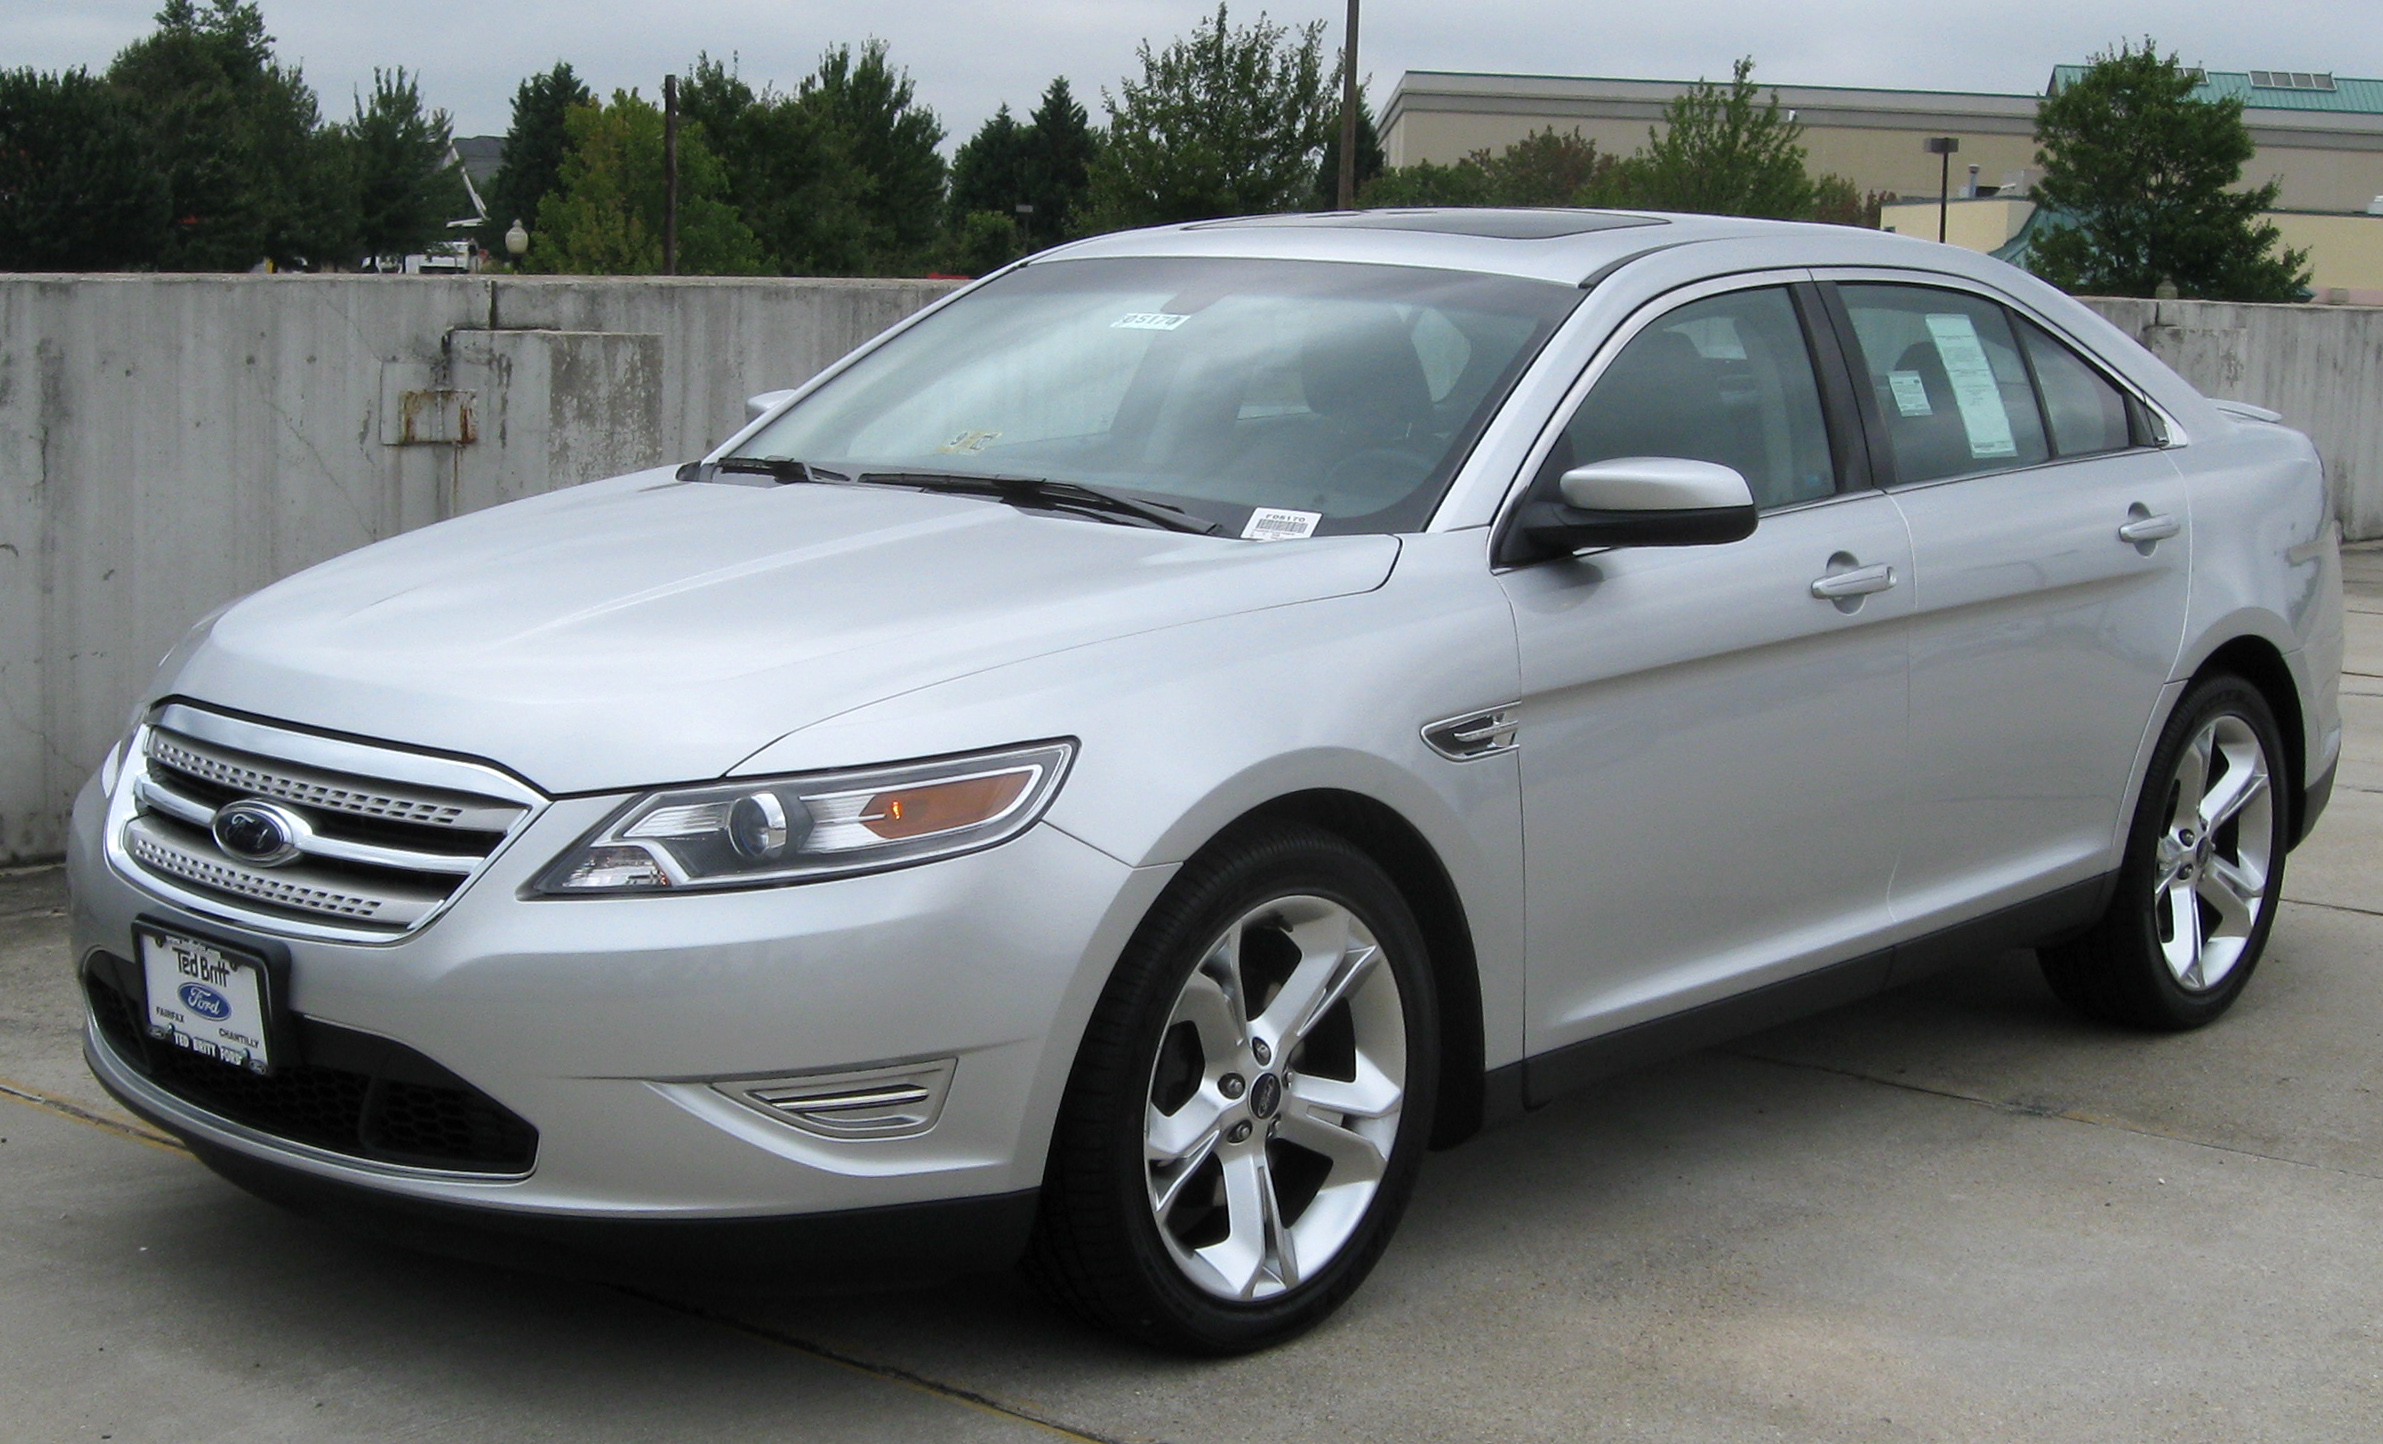 Amazing Ford Taurus Pictures & Backgrounds